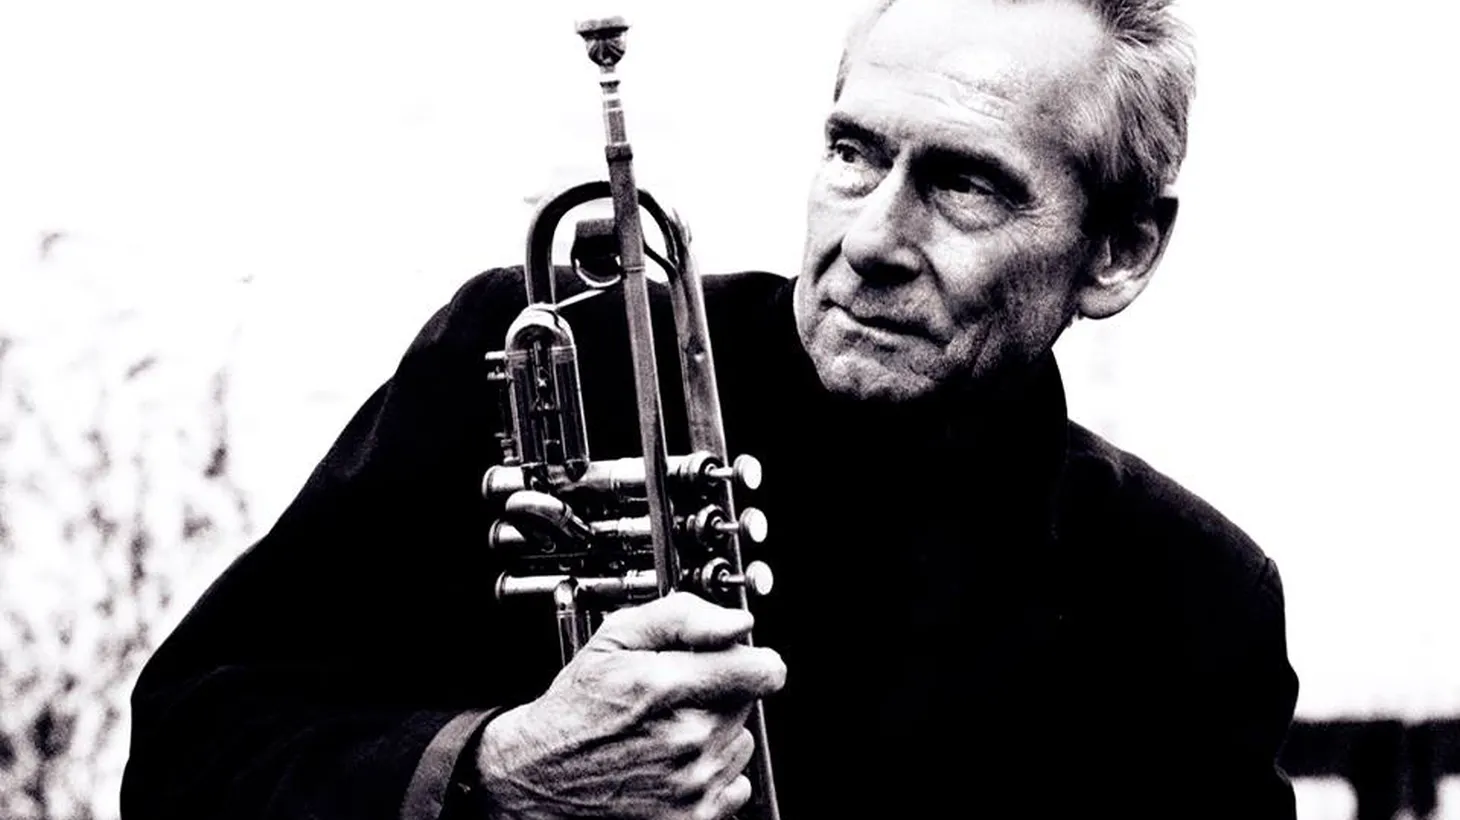 L.A. based composer and avant-garde trumpeter Jon Hassell is revered for his minimalist ambient work. We'll have a rare visit when he brings a trio to perform select pieces for Morning Becomes Eclectic listeners at 11:15am.